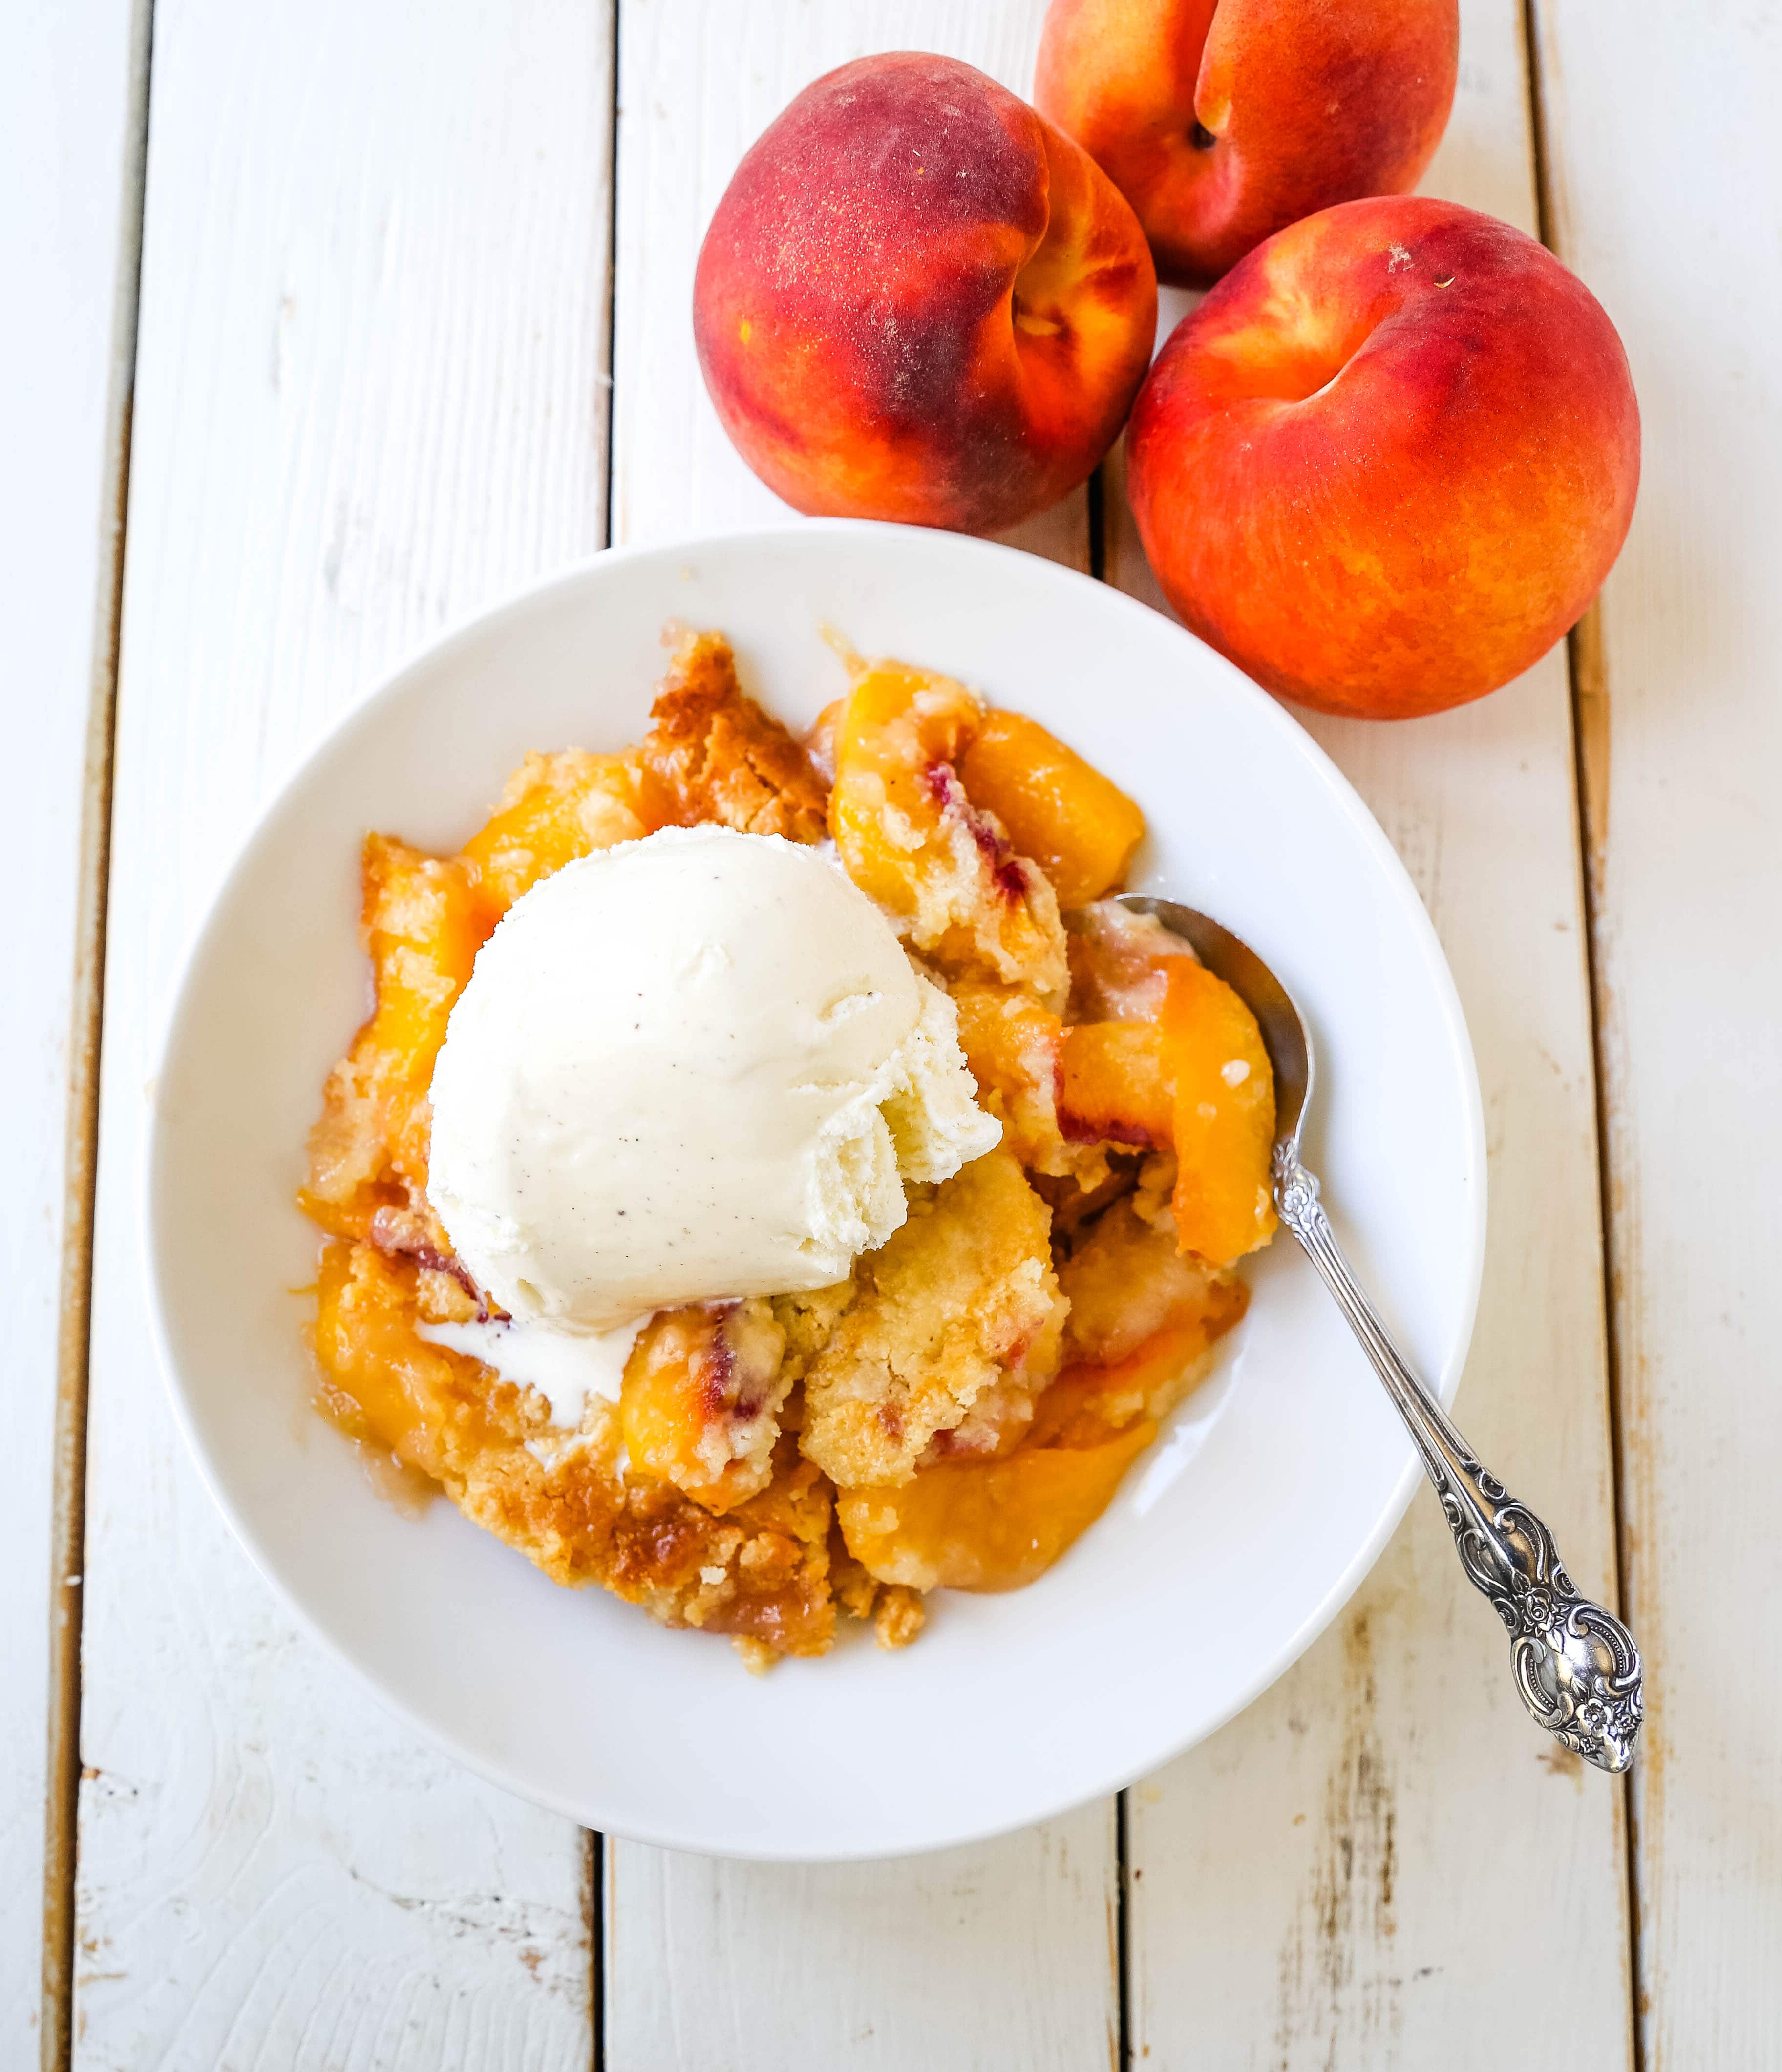 Peach Dump Cake The easiest 4-ingredient peach dessert. Fresh peaches, a touch of sugar, French vanilla cake mix, and butter all baked until golden and topped with vanilla ice cream. The simplest peach cobbler dessert recipe! www.modernhoney.com #peach #peaches #peachdesserts #peachcobbler #peachdumpcake